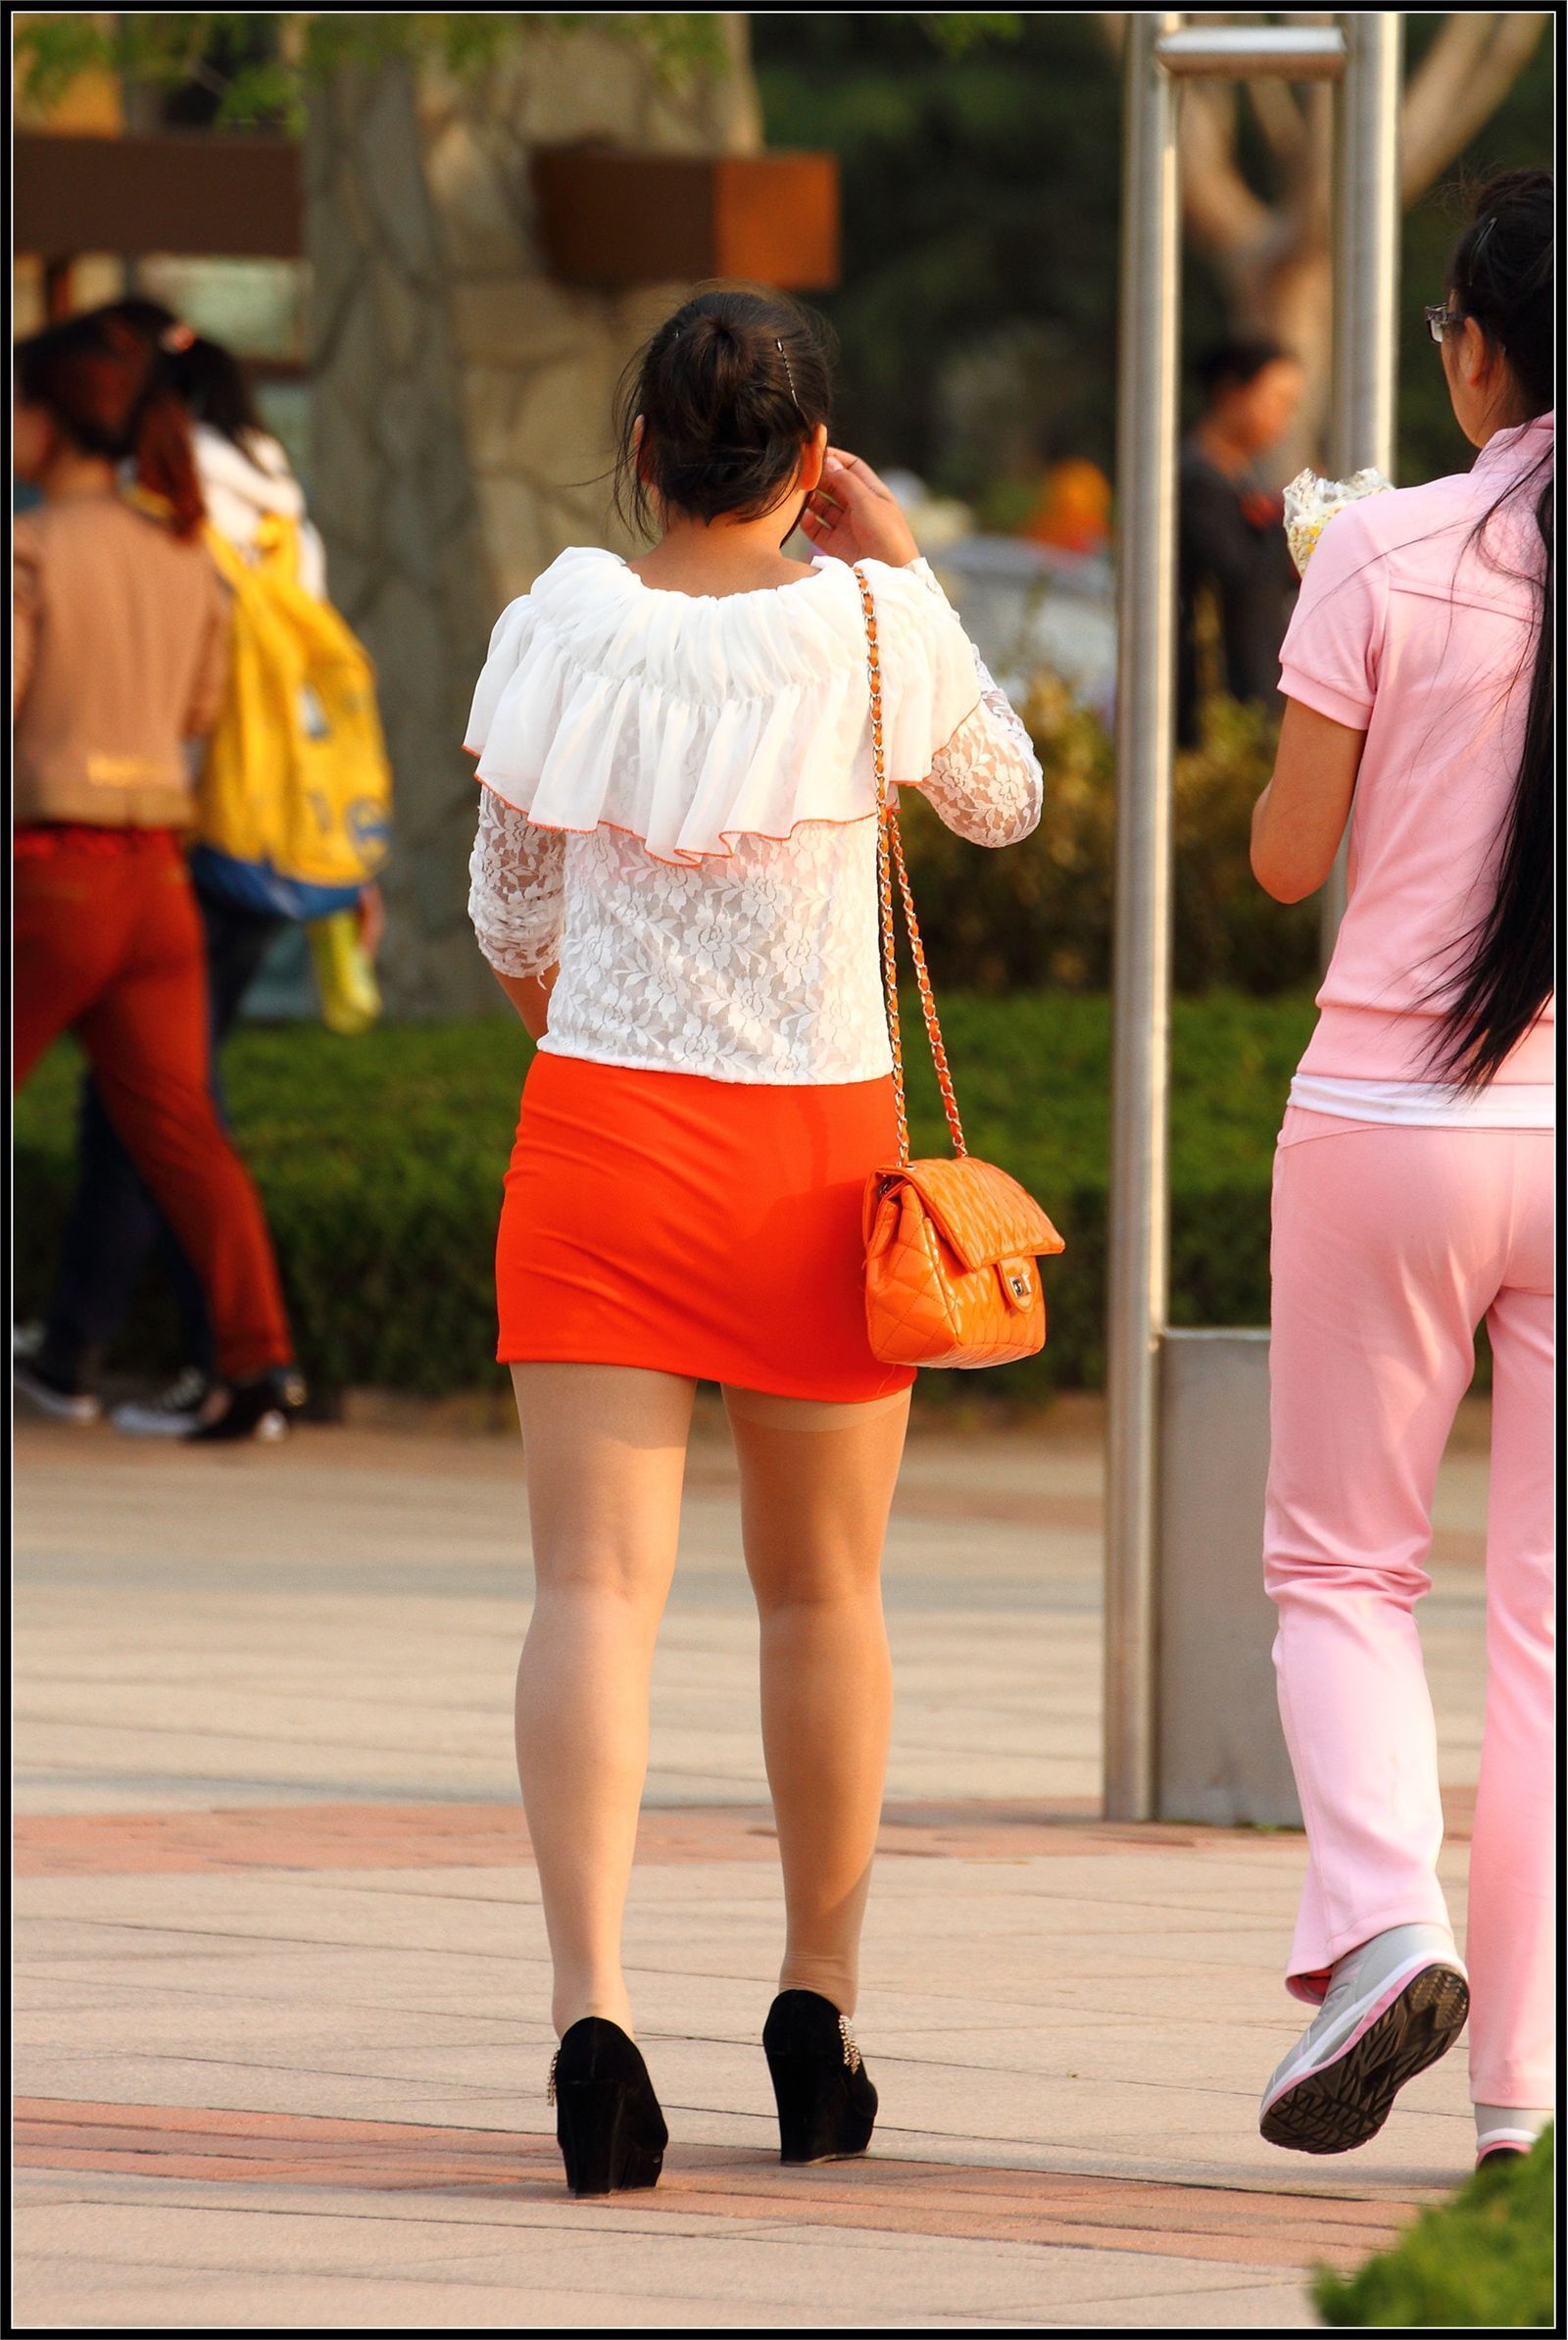 [outdoor Street Photo] 2013.09.25 orange and white dresses are so charming